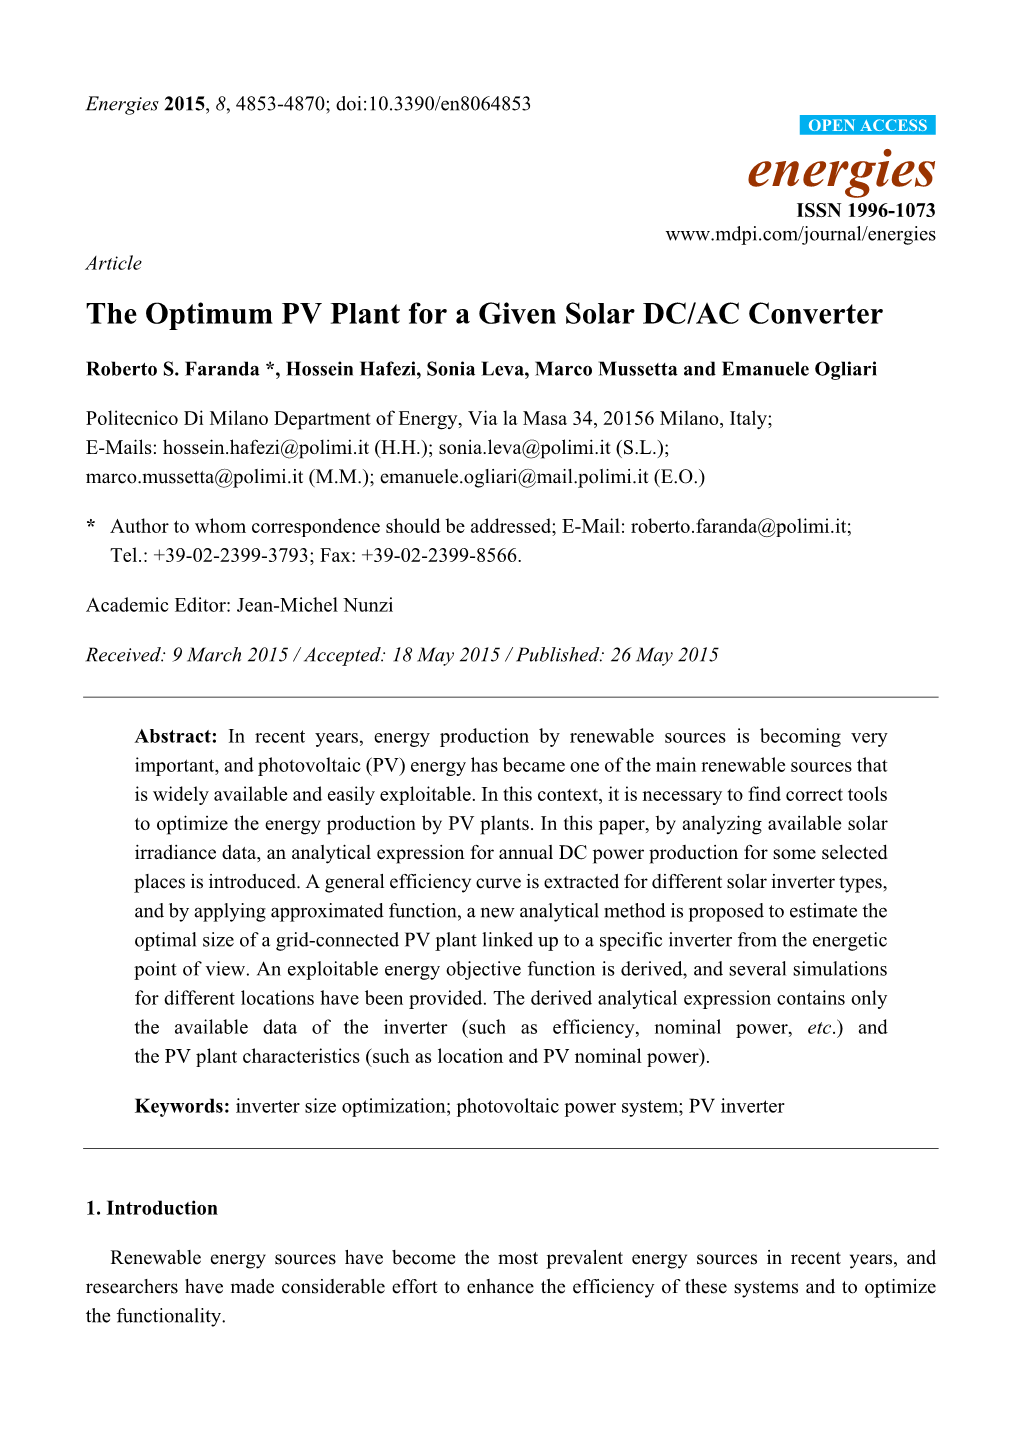 The Optimum PV Plant for a Given Solar DC/AC Converter